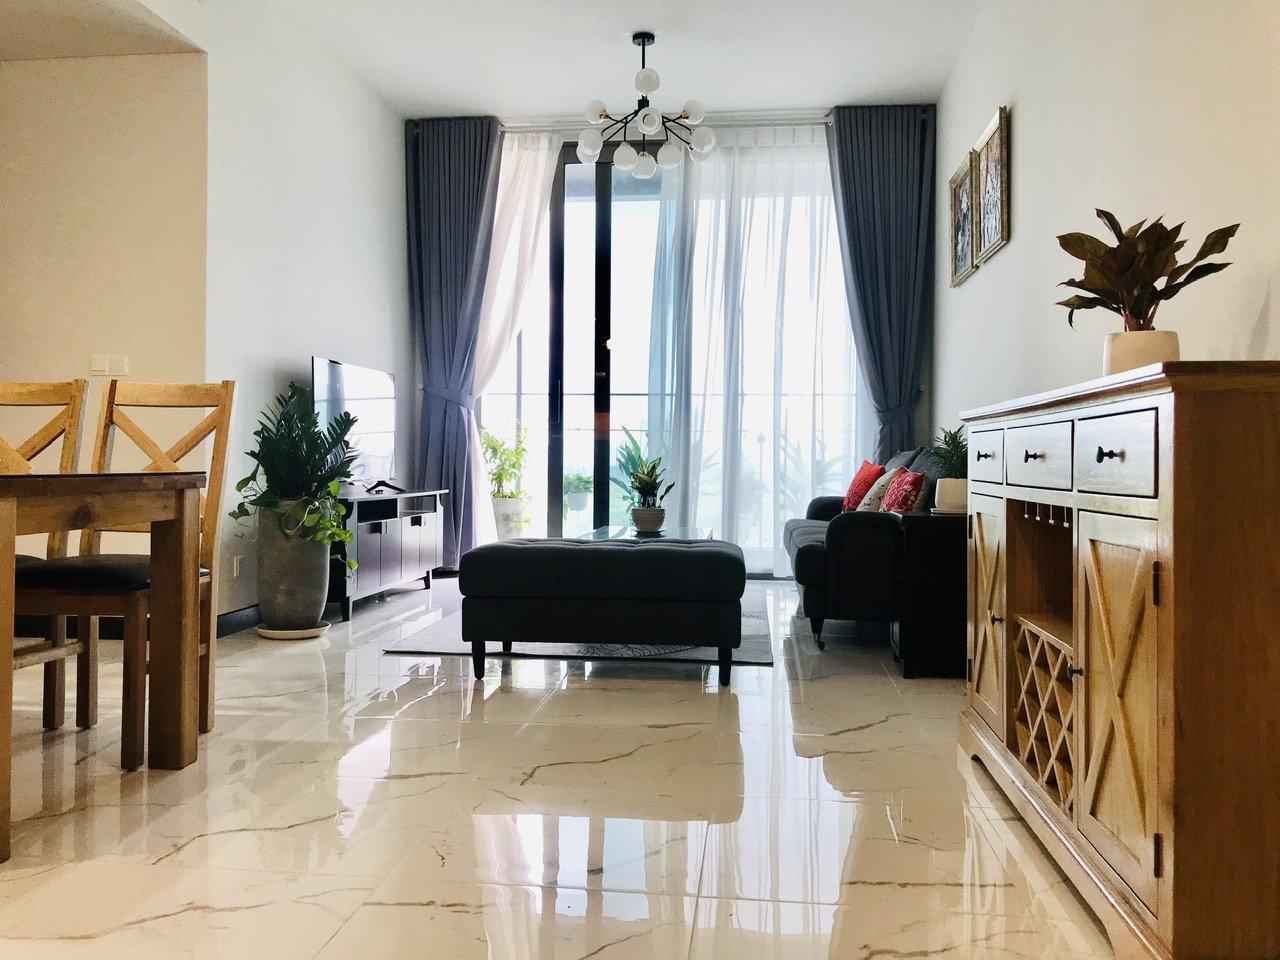 Empire city for rent, 1400$ 92m2 full furnished apartment